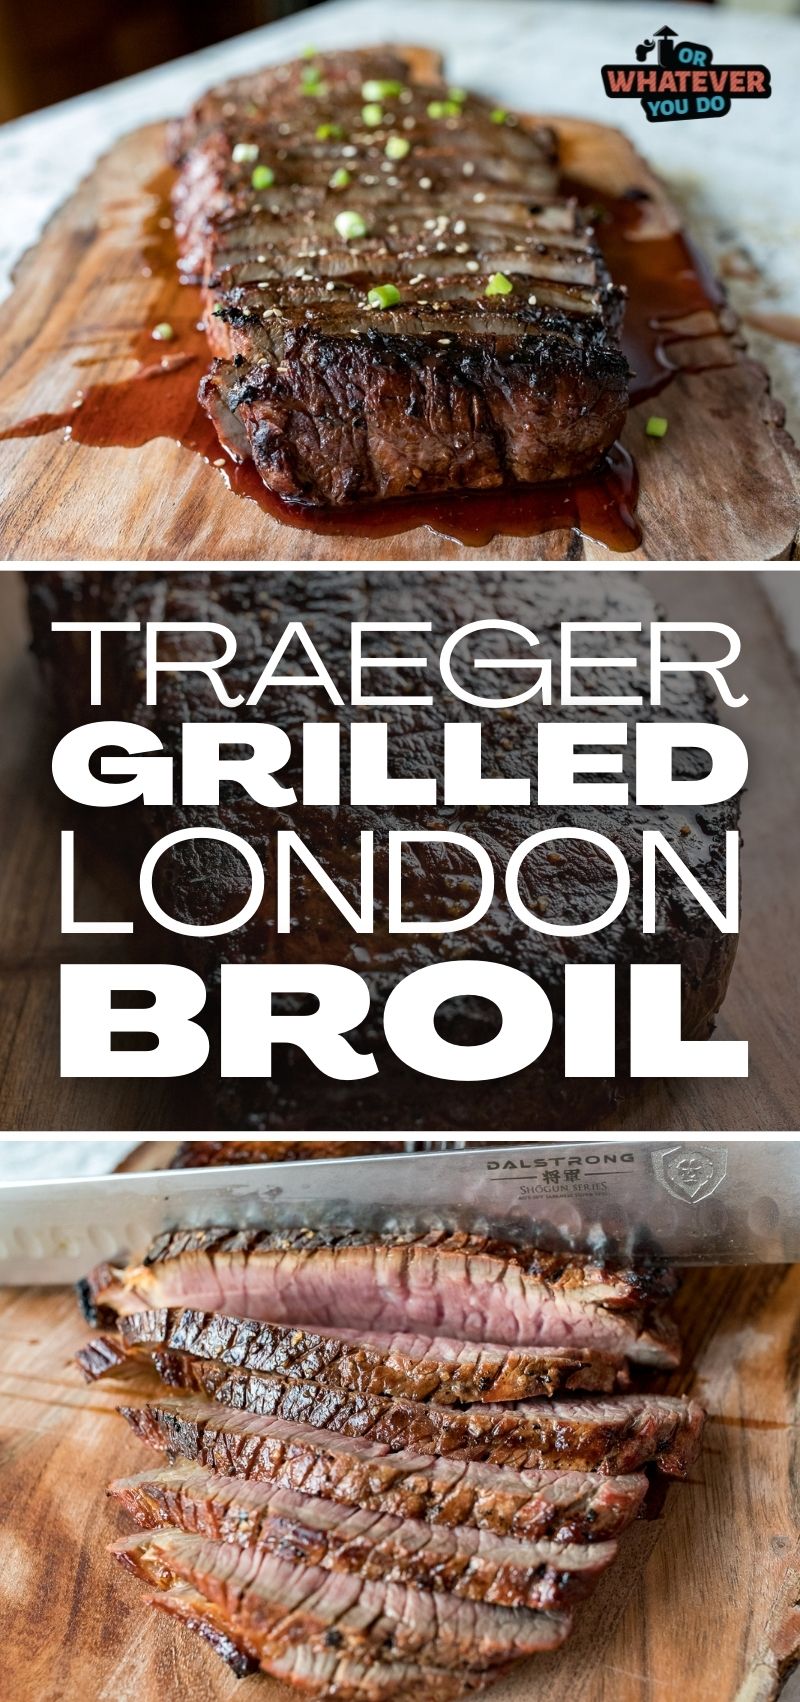 Traeger Grilled London Broil on a wooden cutting board, being sliced with a knife